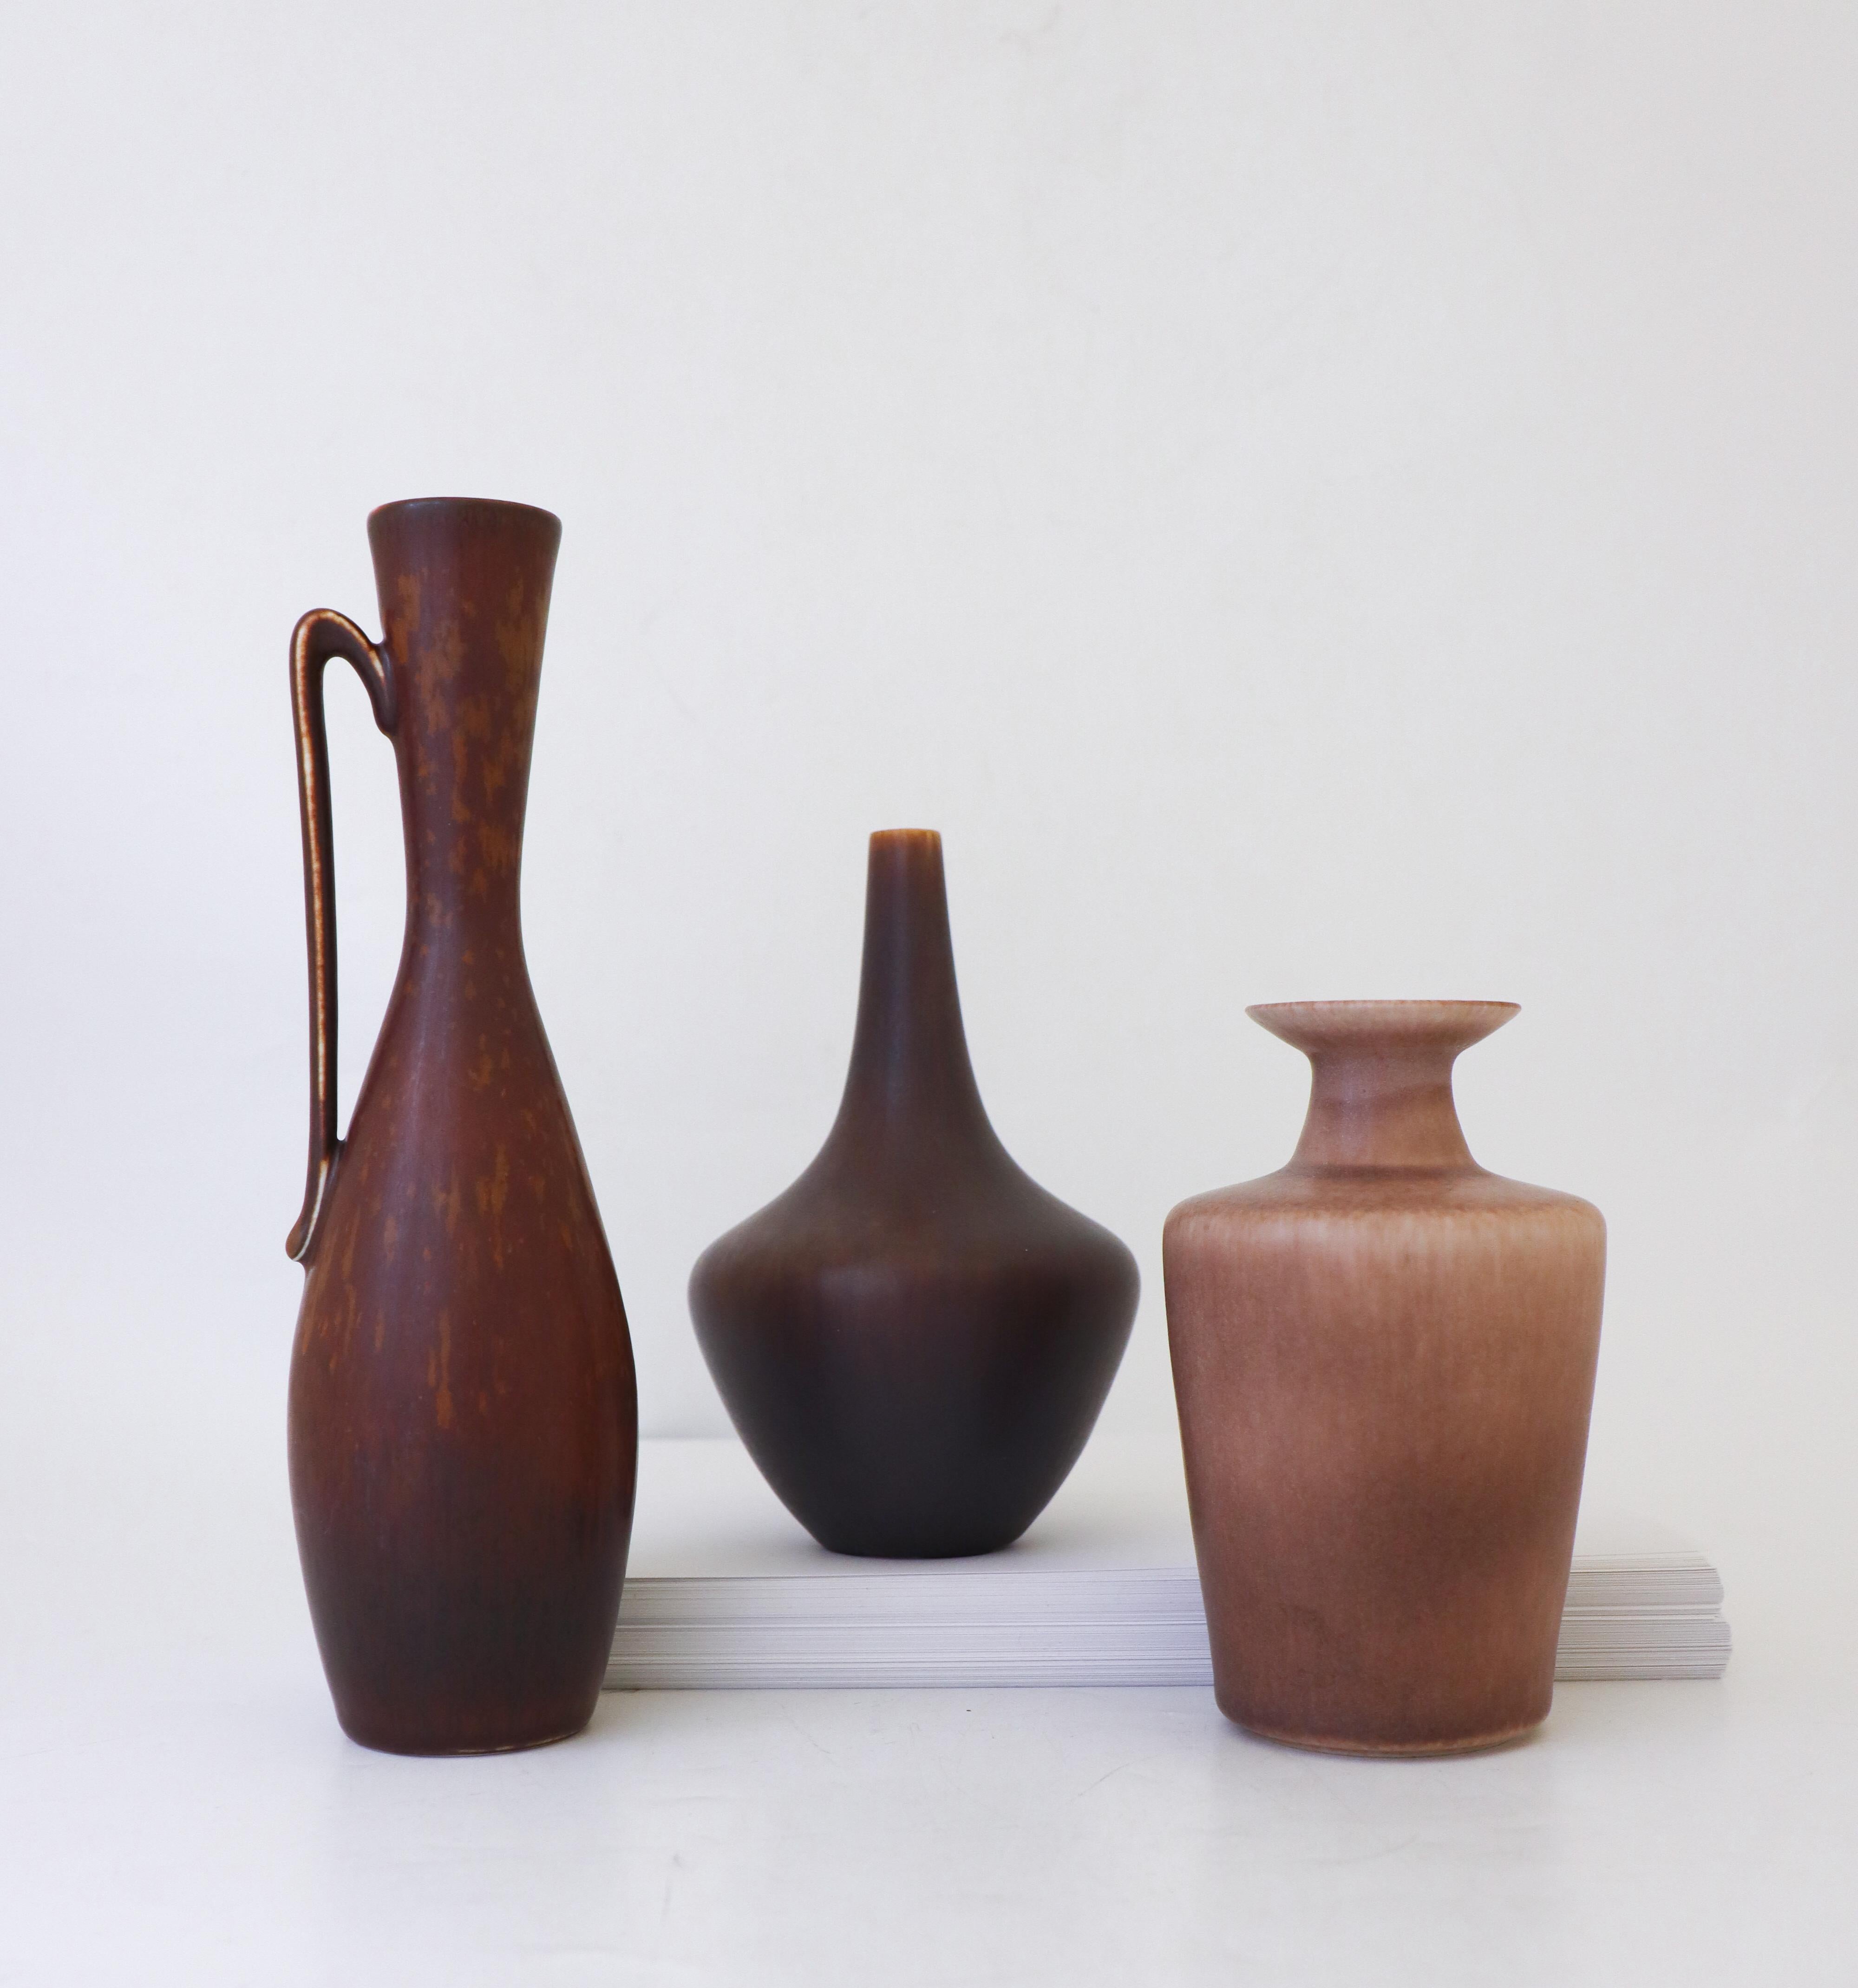 A set of three vases designed by Gunnar Nylund at Rörstrand. The vases are 24.5, 17 and 14.5 cm high. They are all in excellent condition and marked as 1st quality. 

Gunnar Nylund was born in Paris 1904 with parents who worked as sculptors and